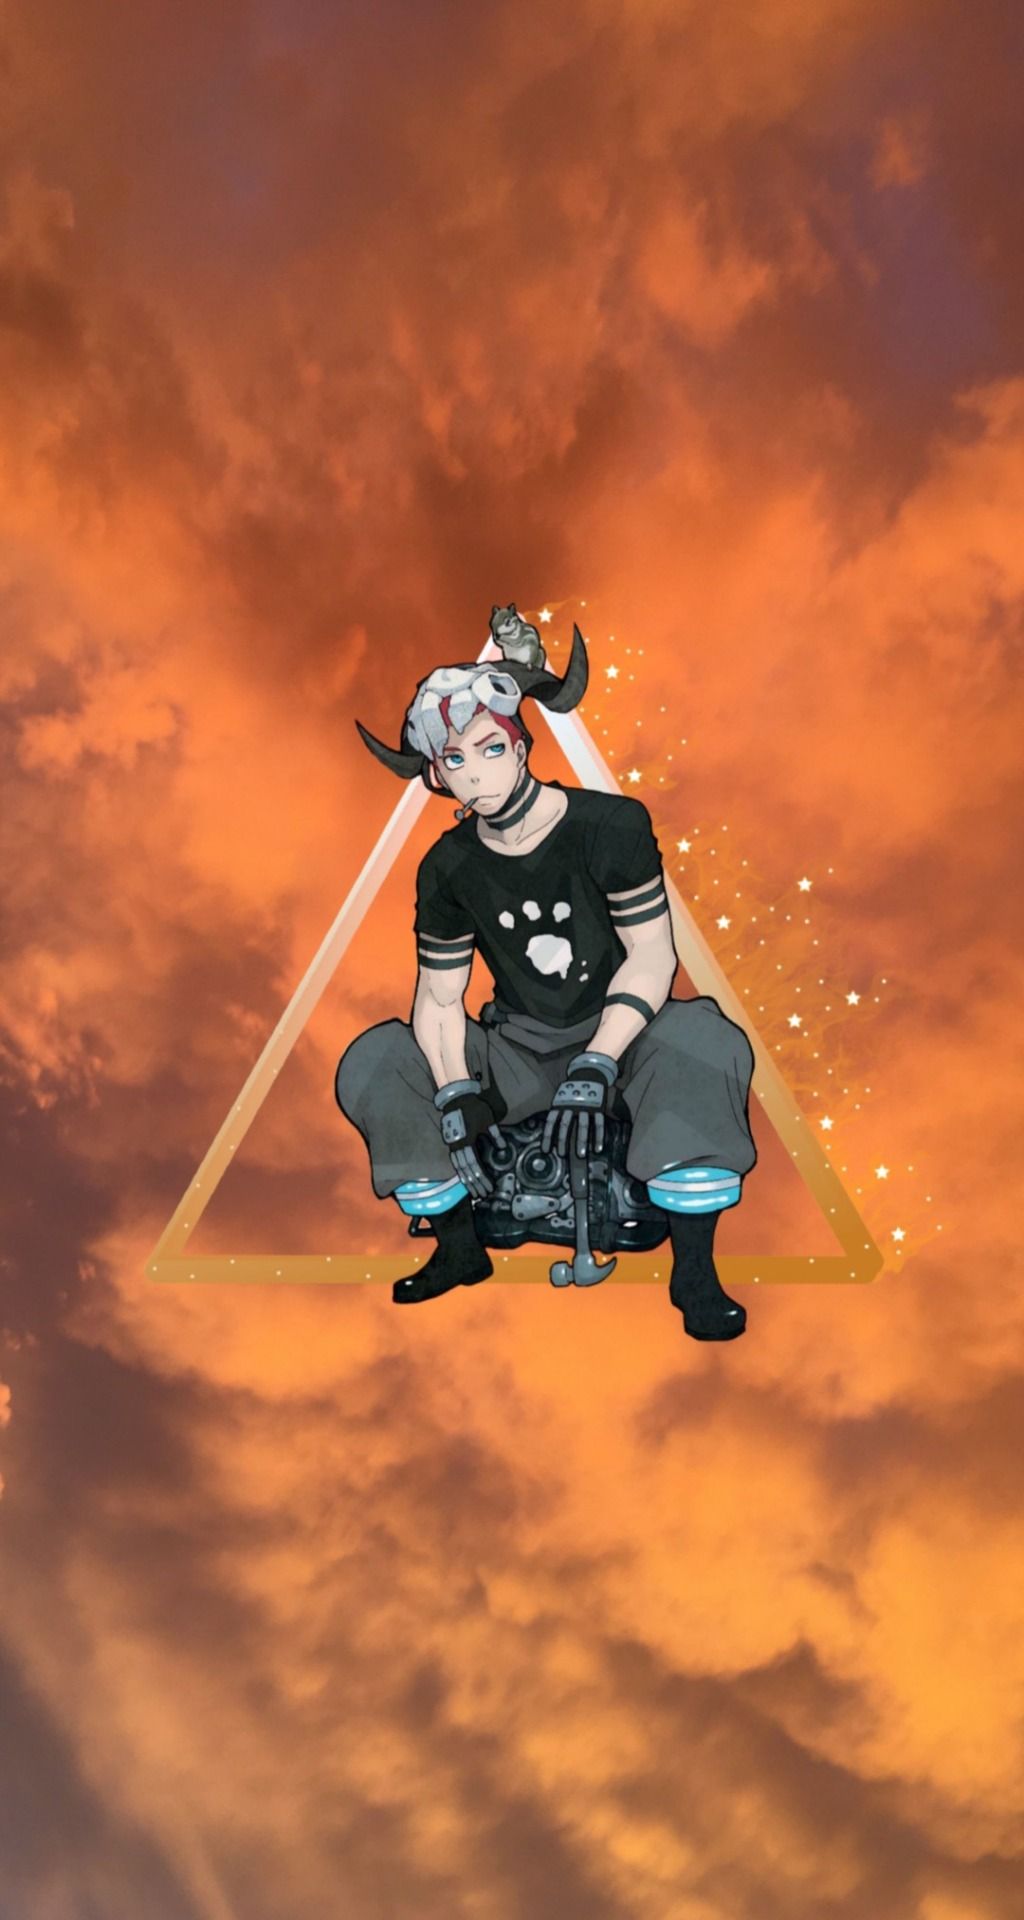 A boy with horns and a cat on his head sitting on clouds - Fire